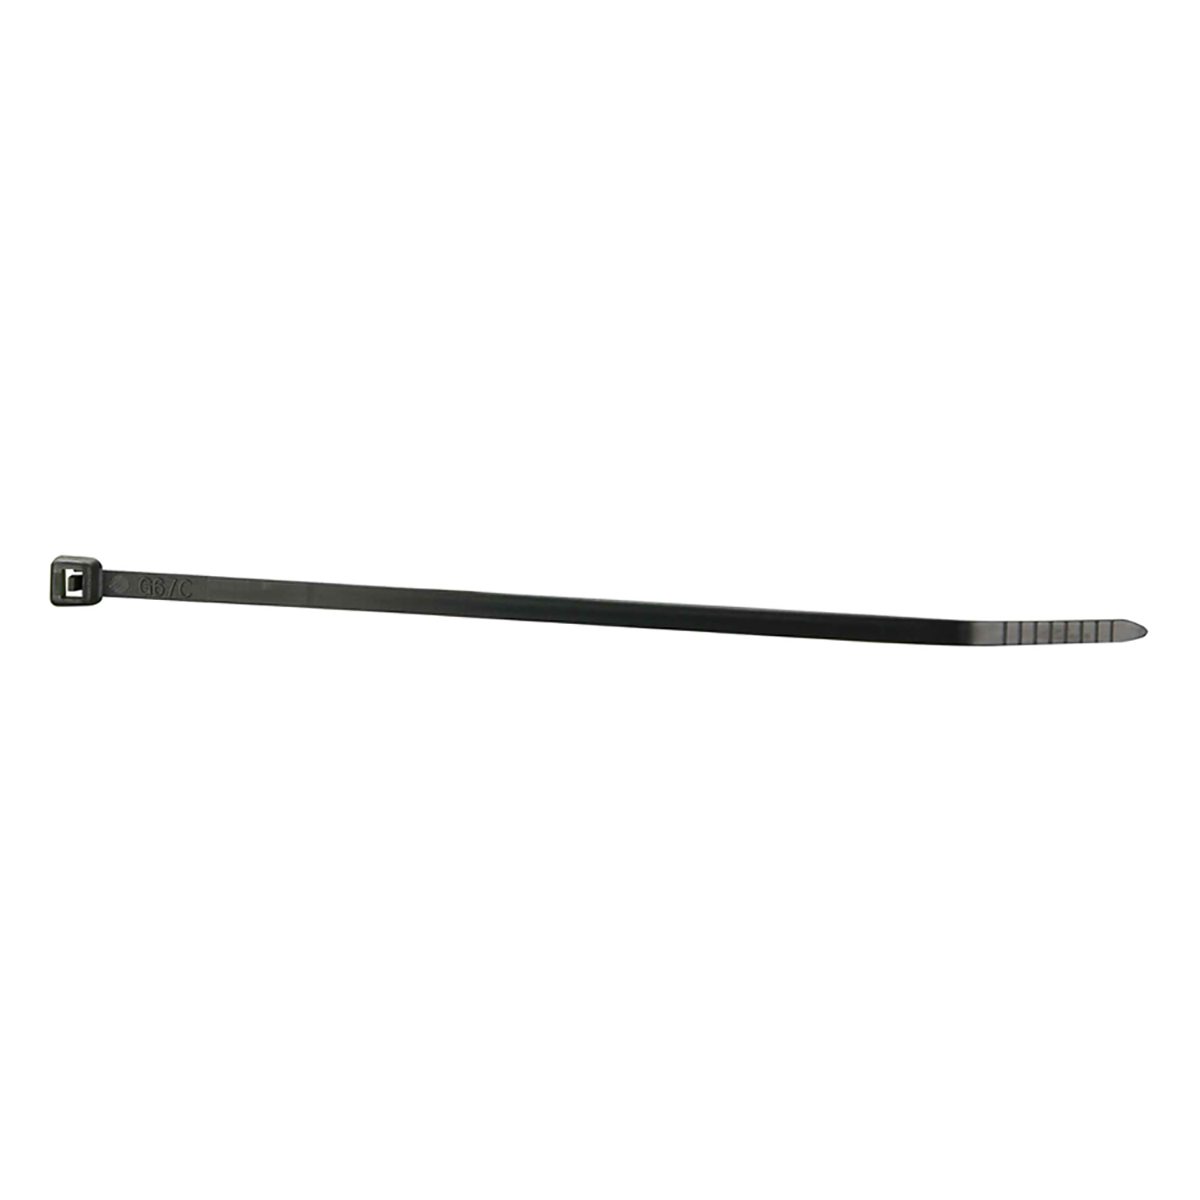 CABLE TIES 14 .in  BLACK 50 LB 100PK